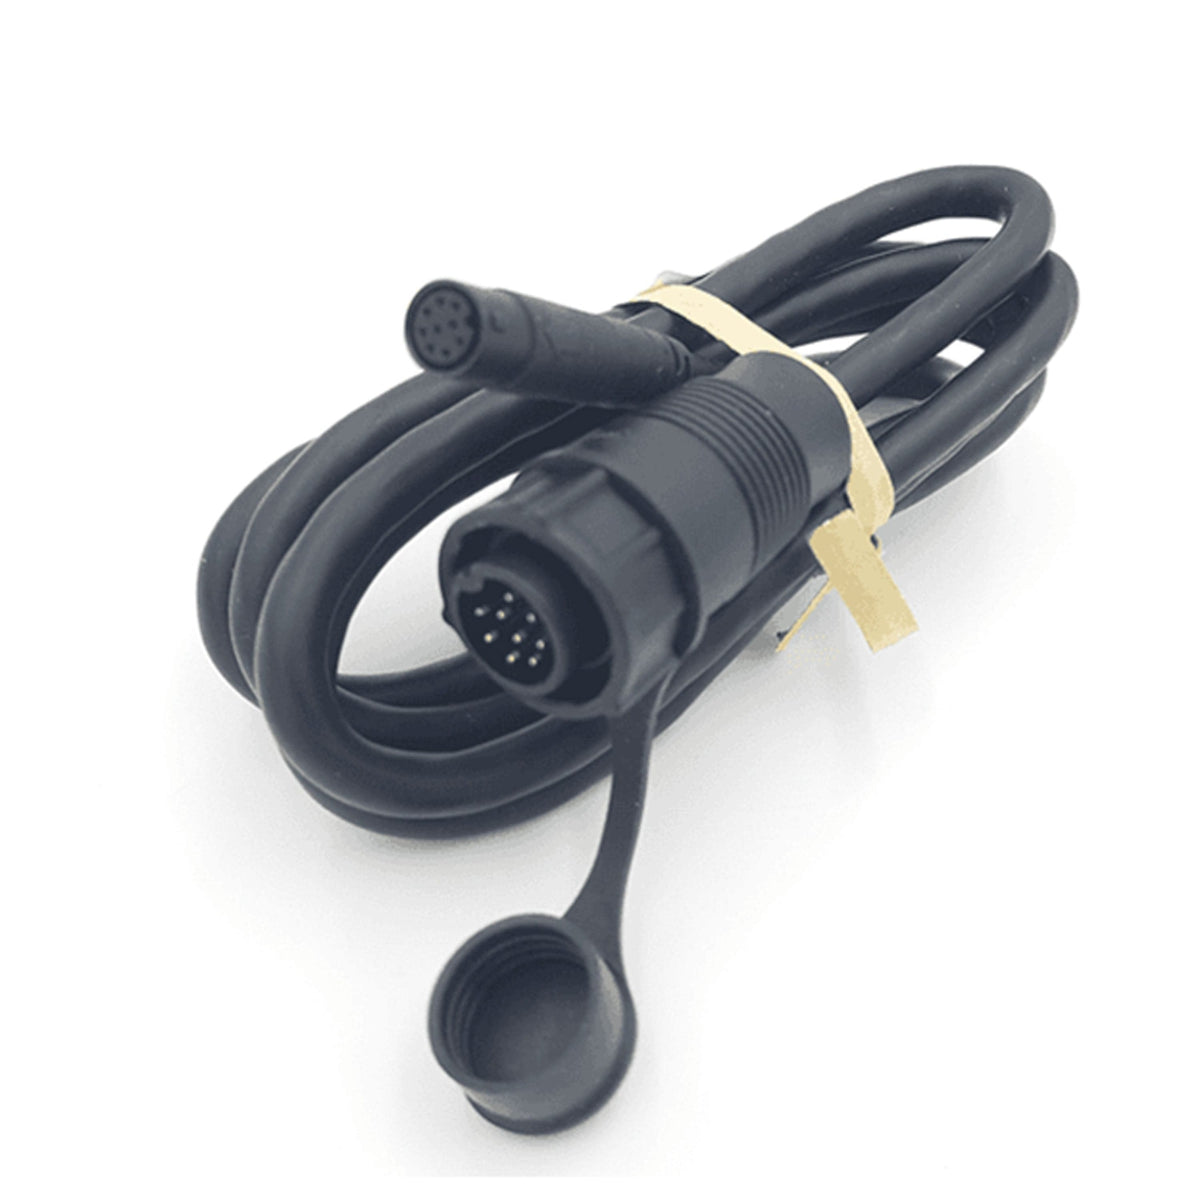 Lowrance Qualifies for Free Shipping Lowrance Sonar Adapter Cable 9-Pin Mini to 9-Pin #000-15327-001